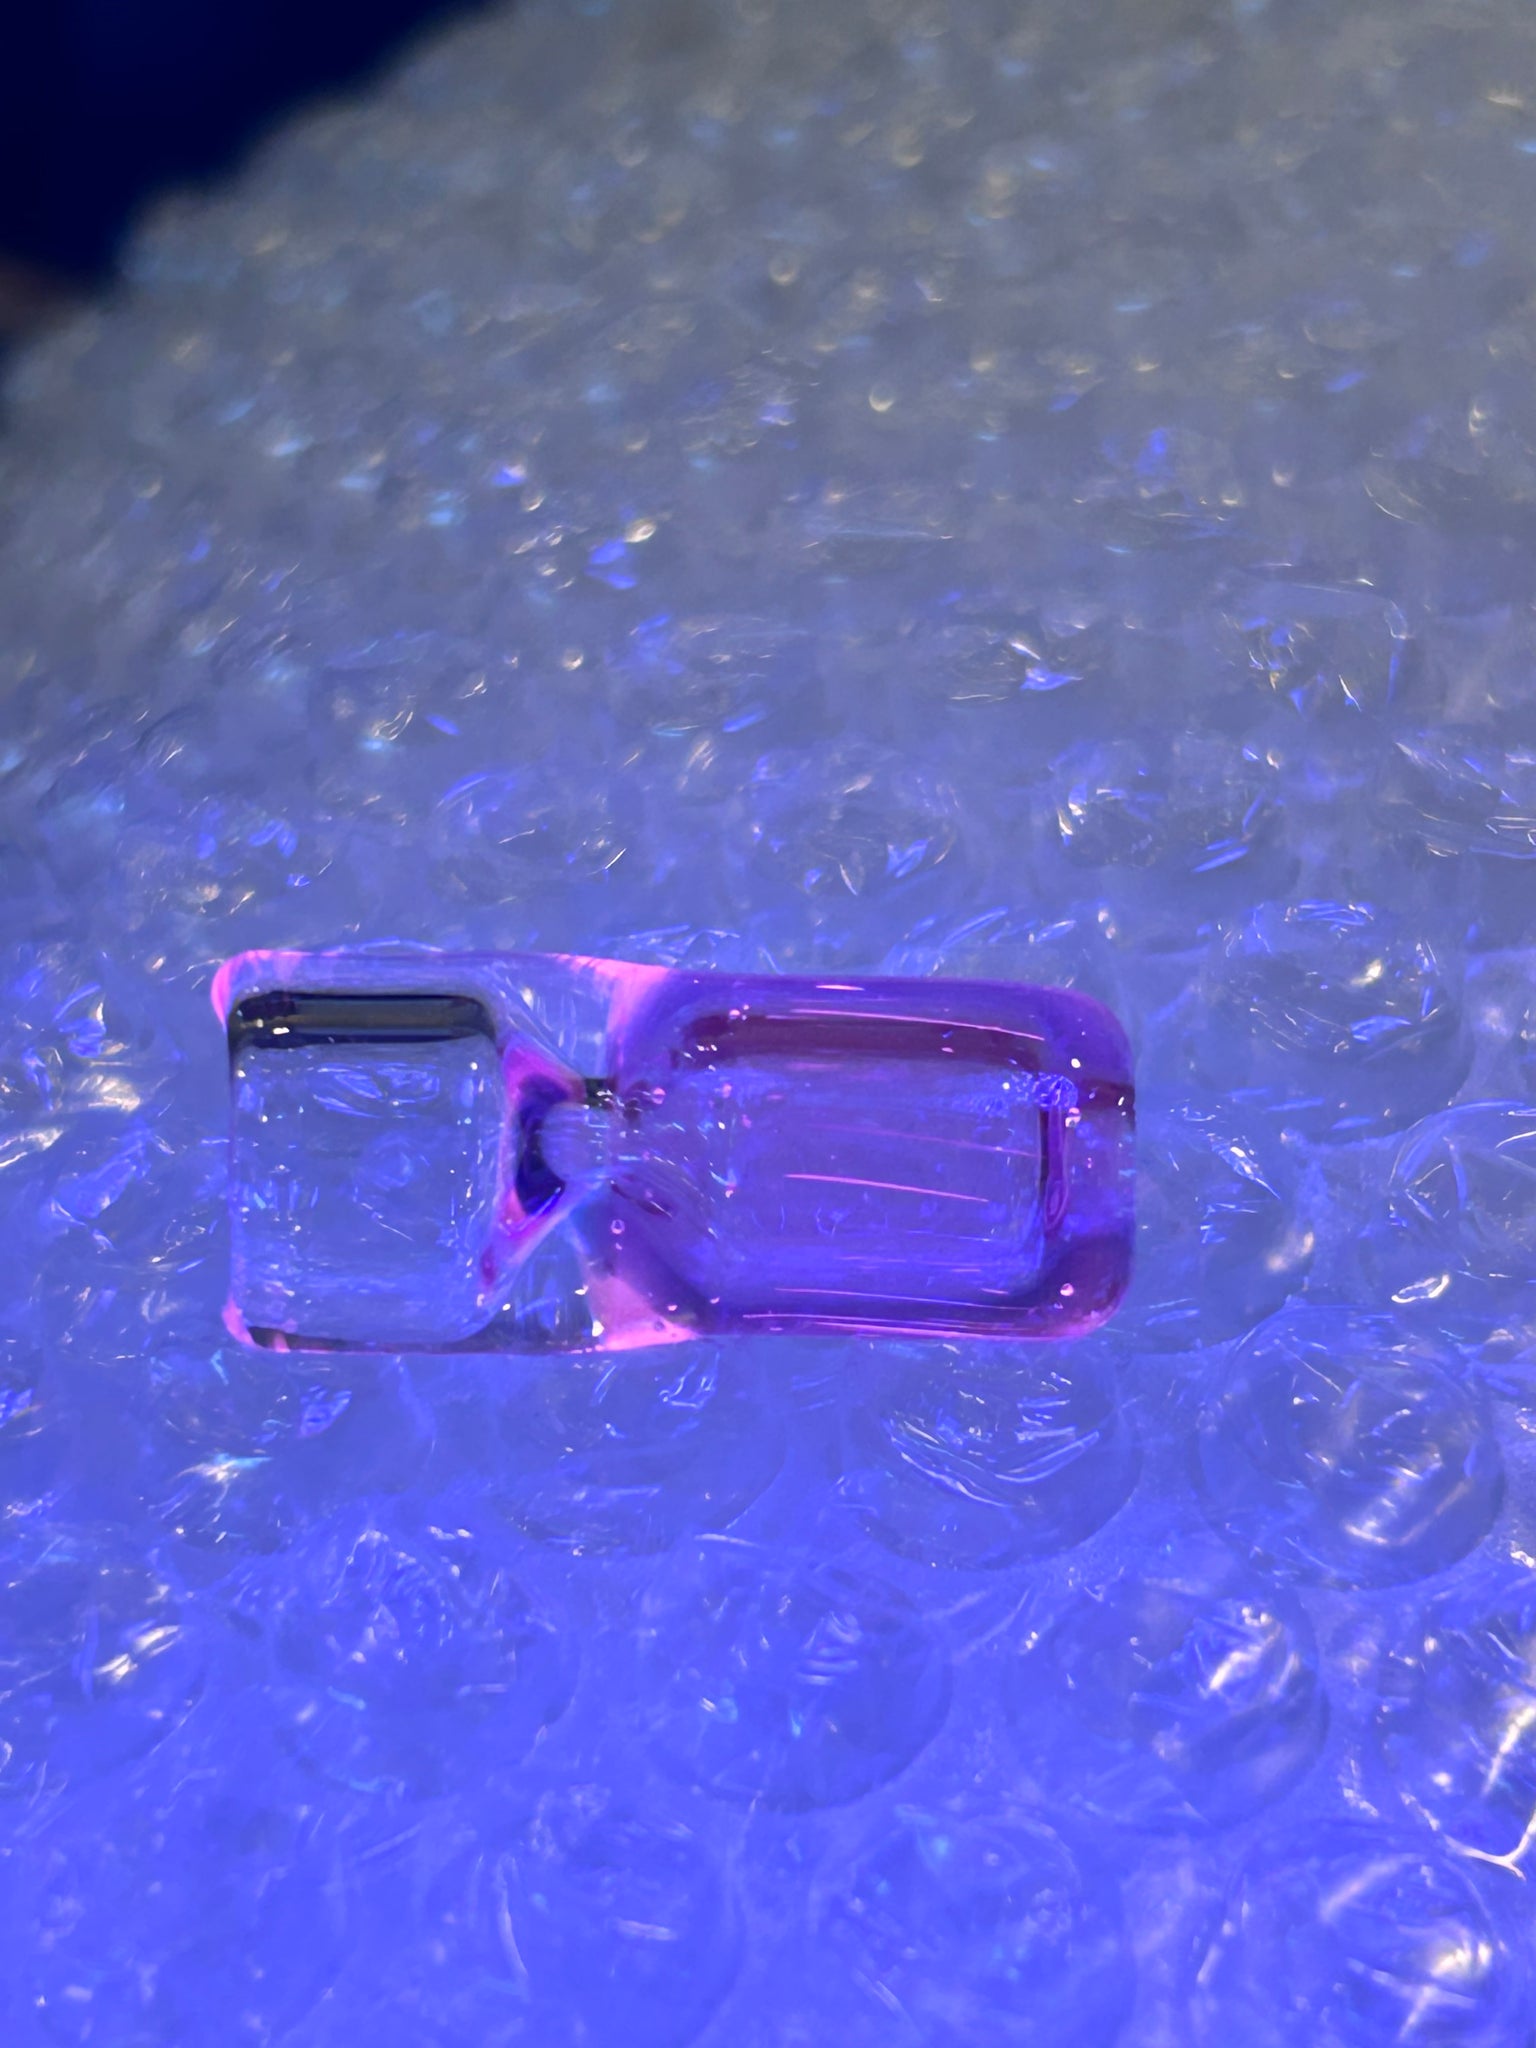 (Limited) 1 UV reactive glass tip